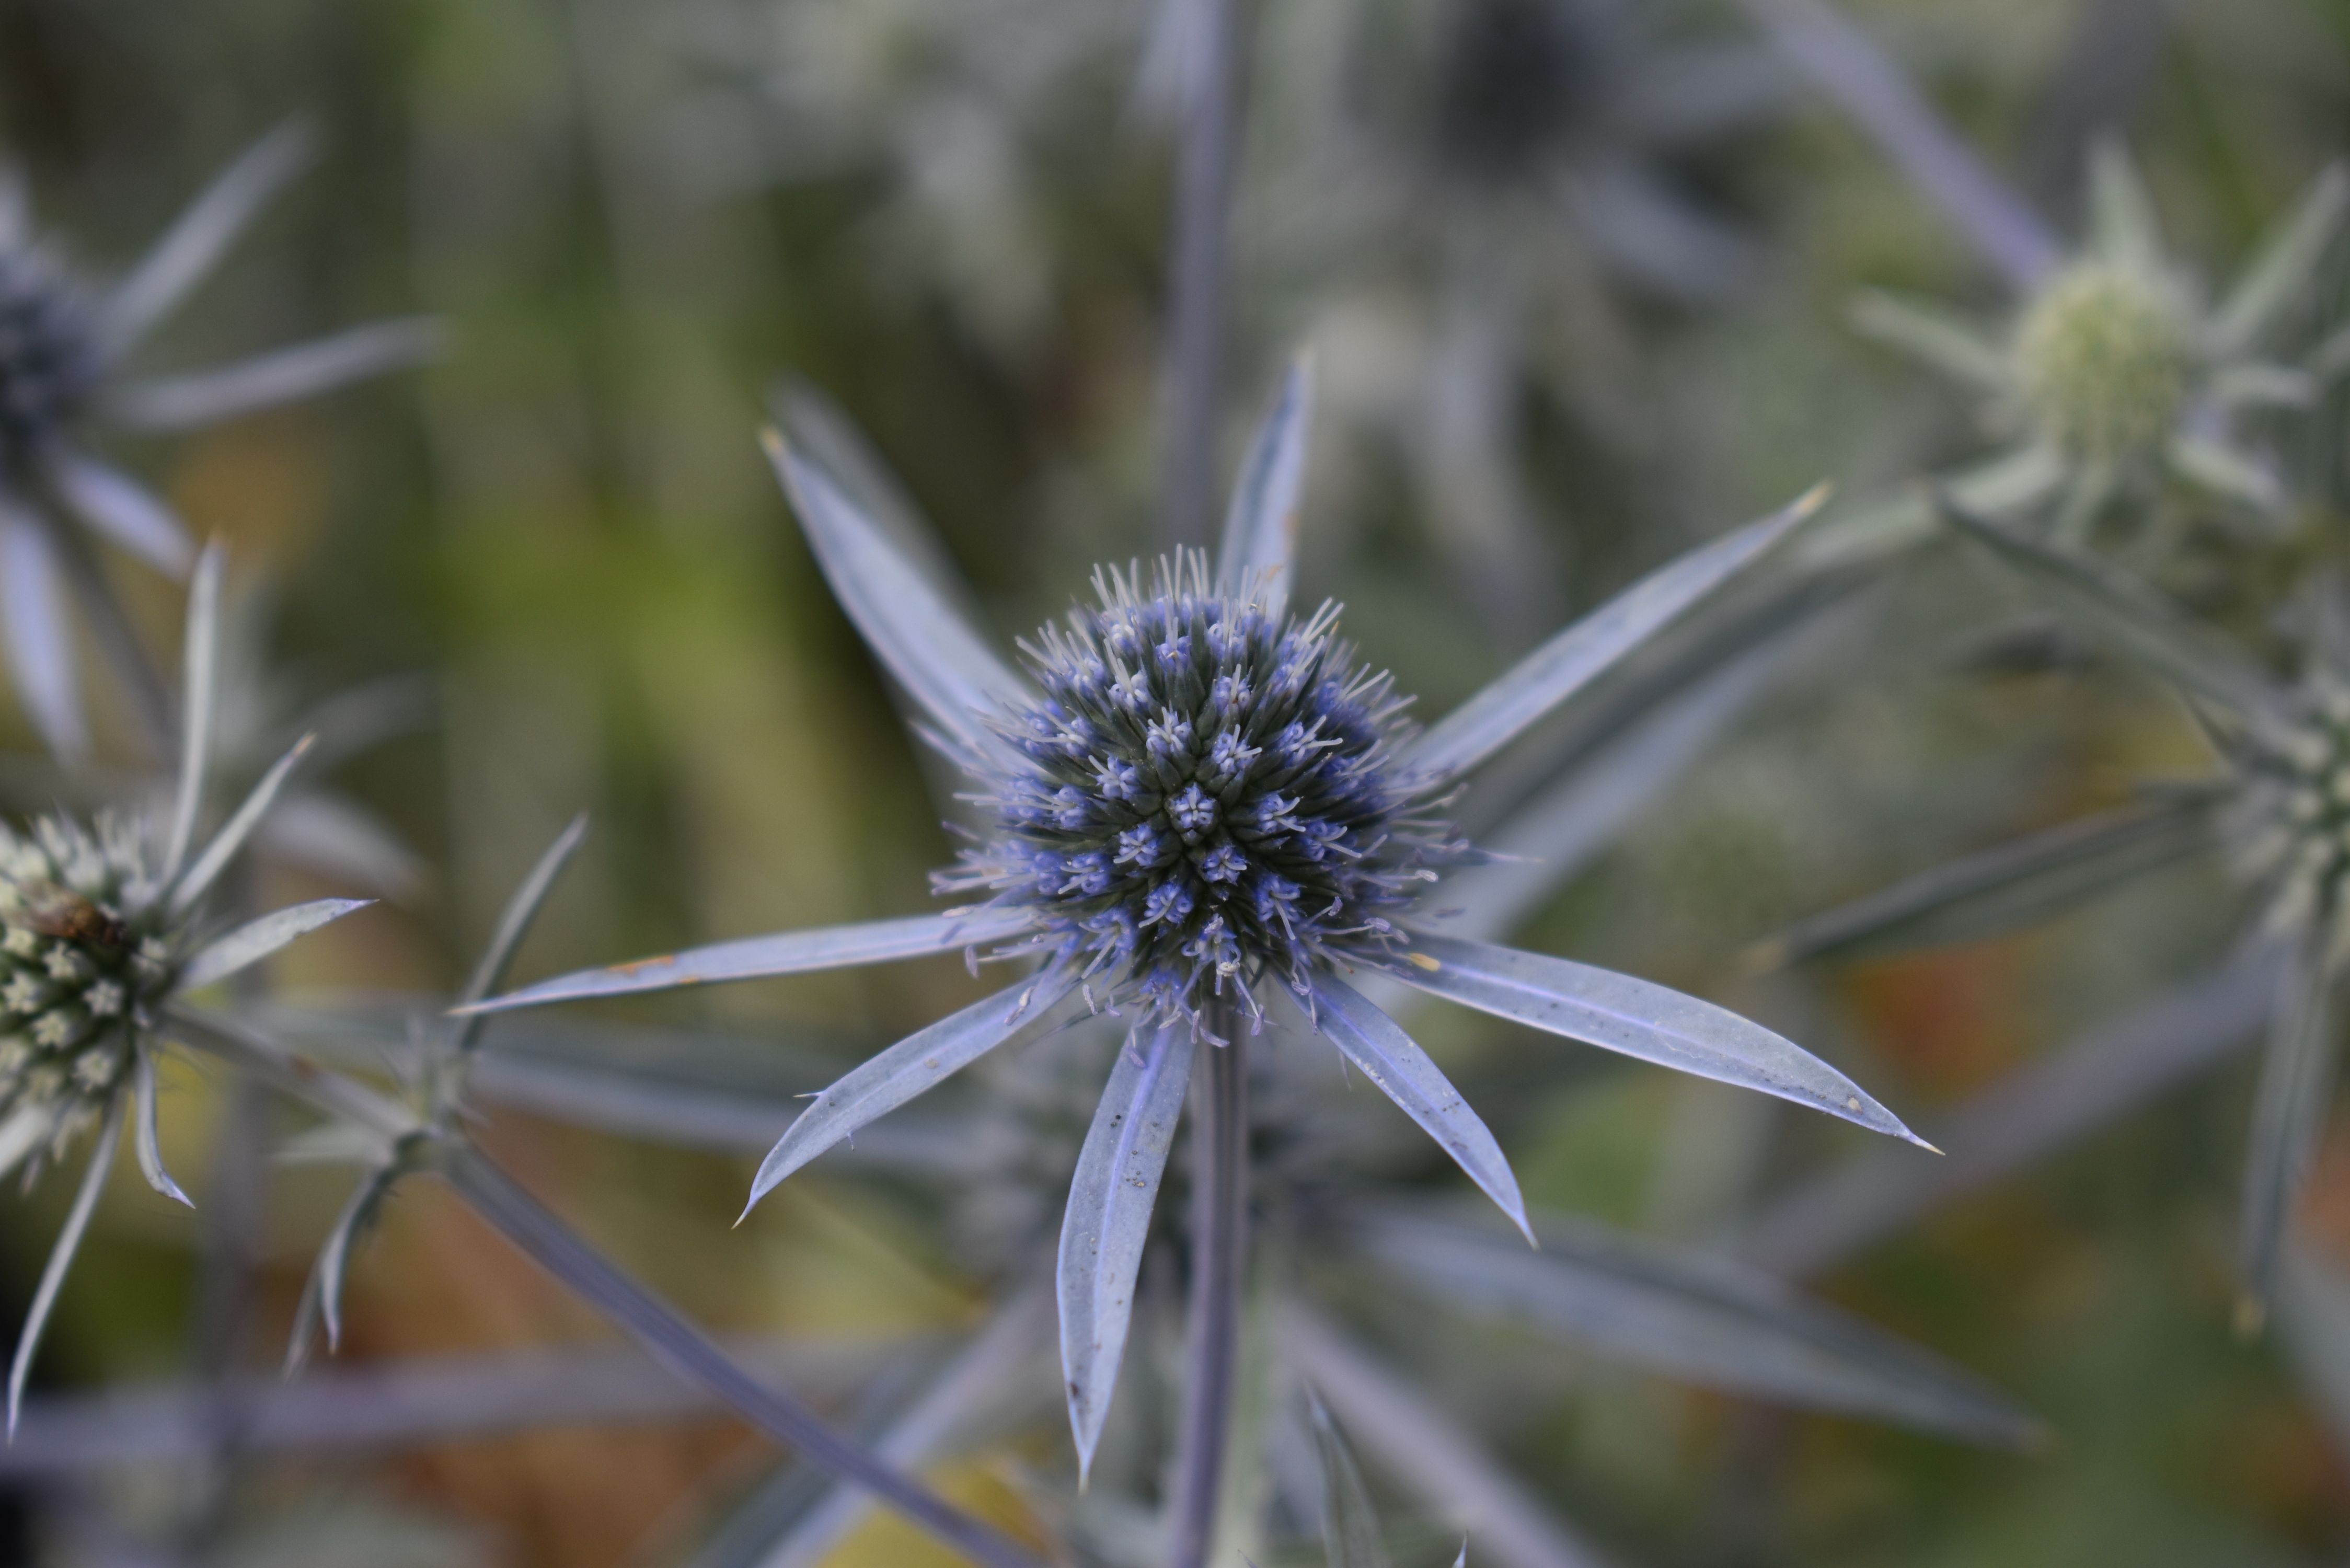 Close-up view of Sea Holly plant with its distinctive spiky blue flowers and leathery leaves